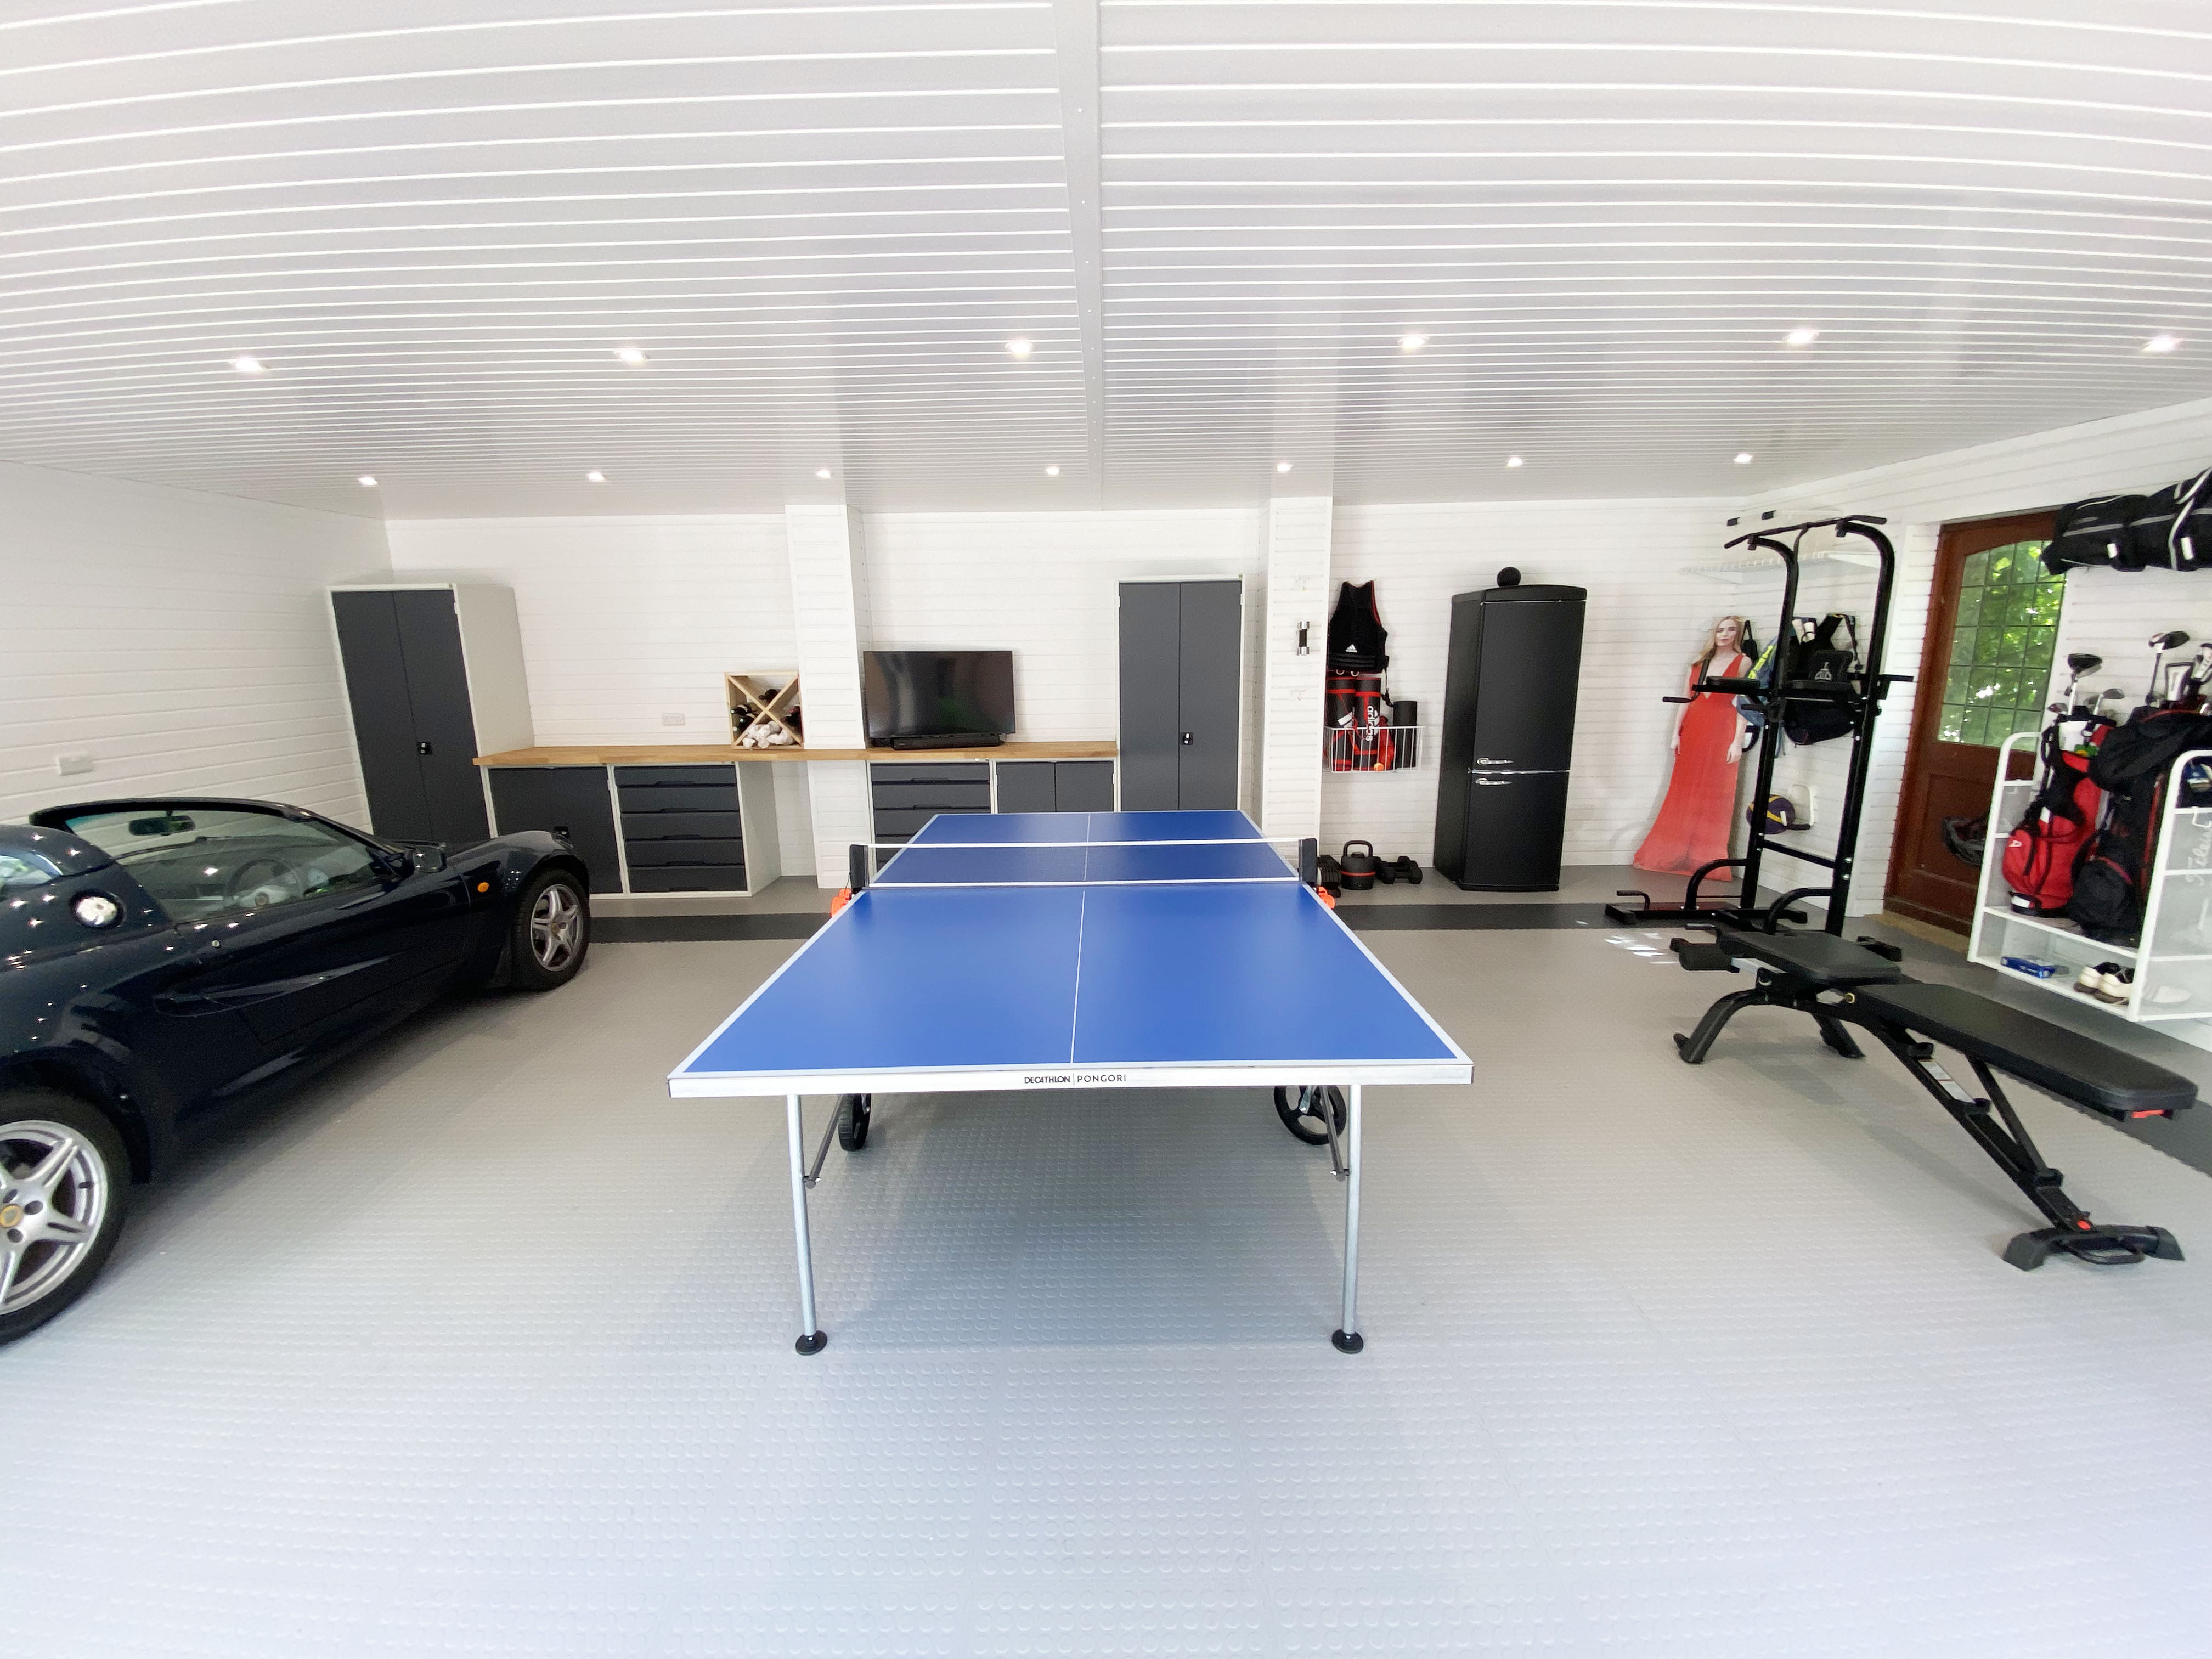 Creating a clutter free garage space